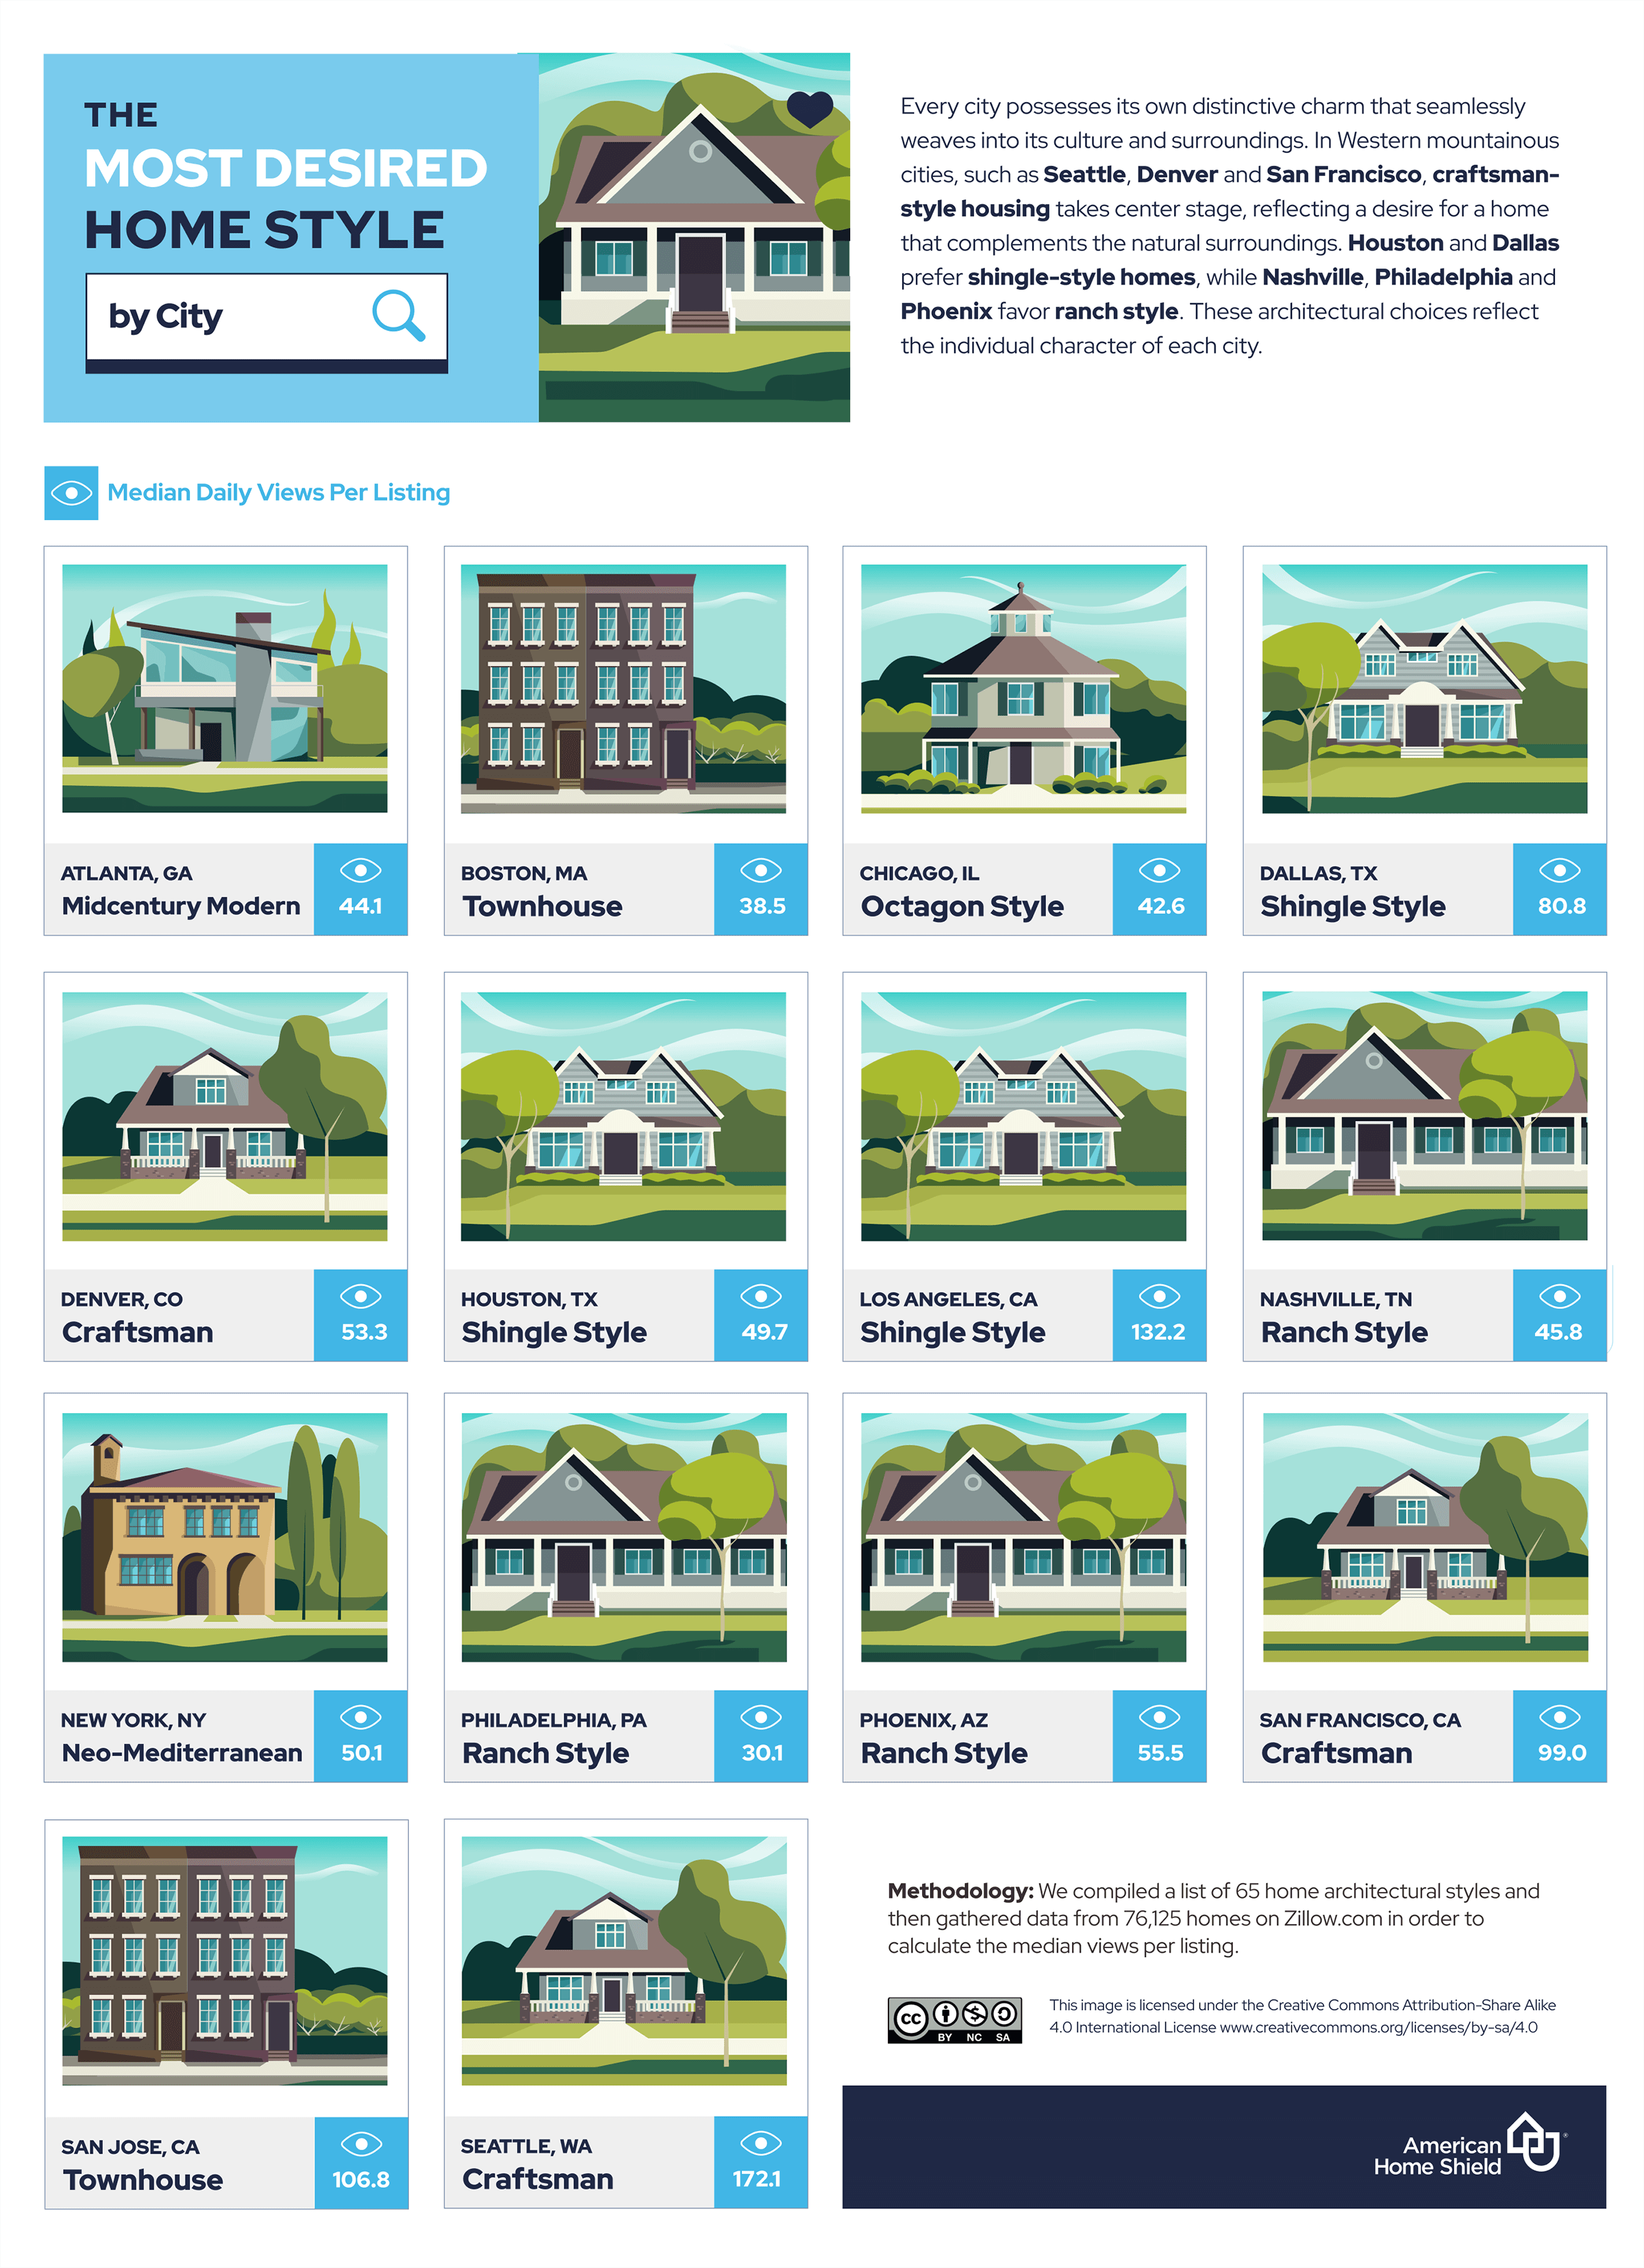 Most desired home styles by city